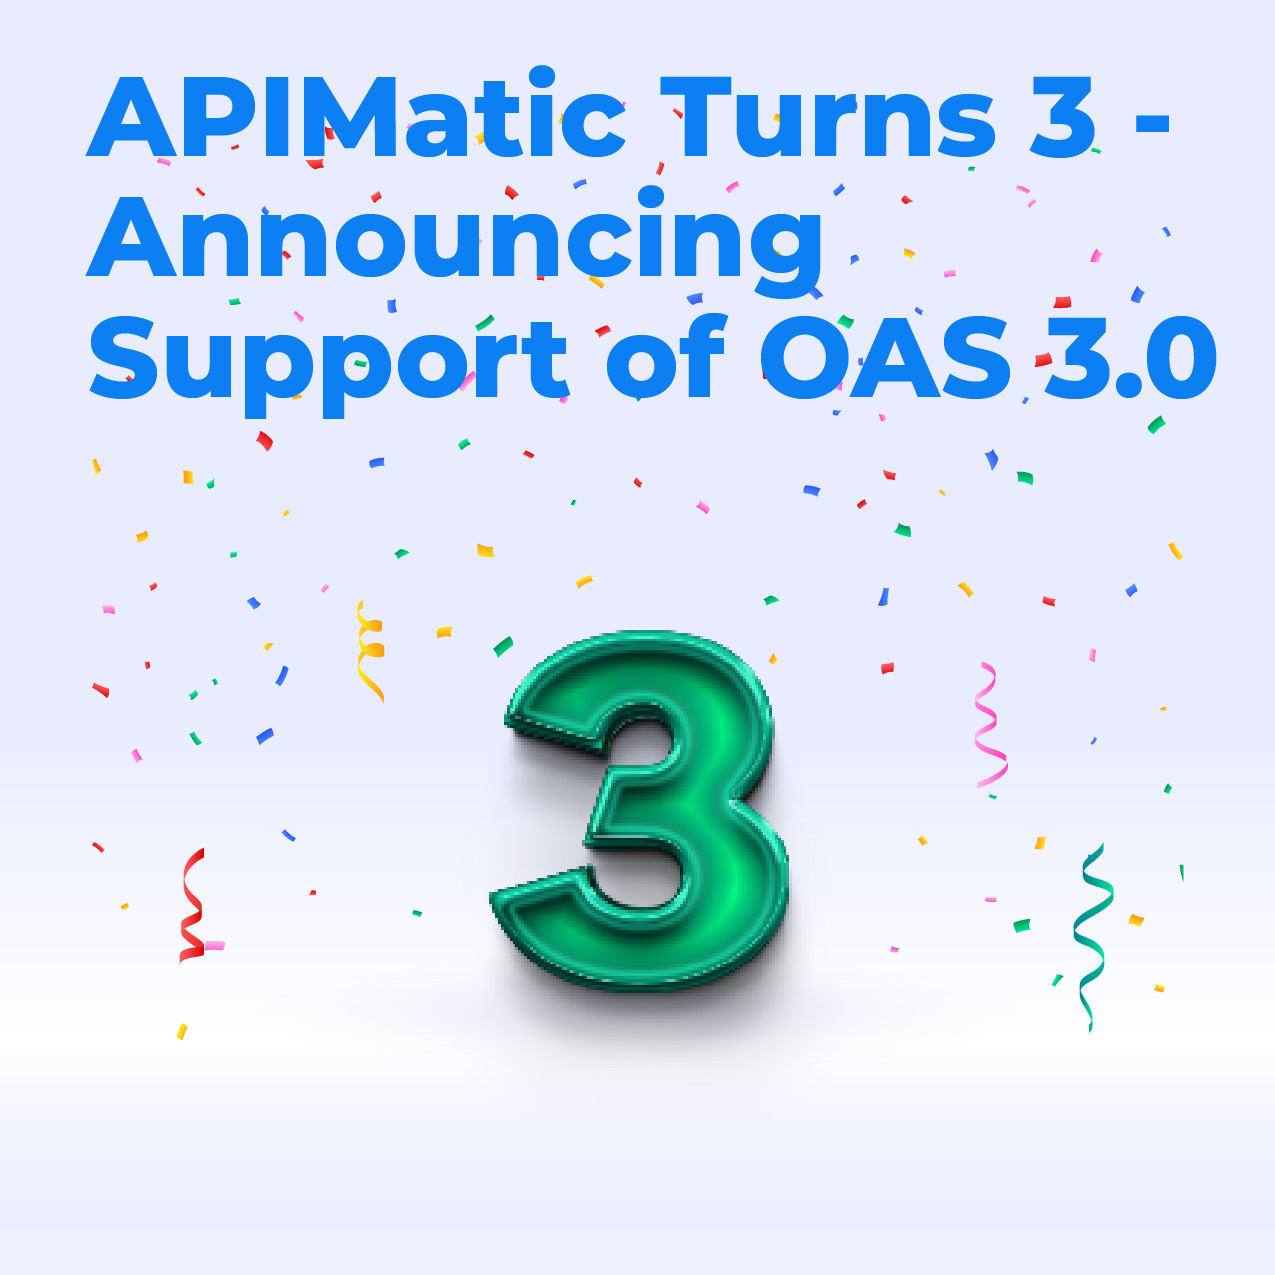 APIMatic Turns 3 - Announcing Support of OAS 3.0